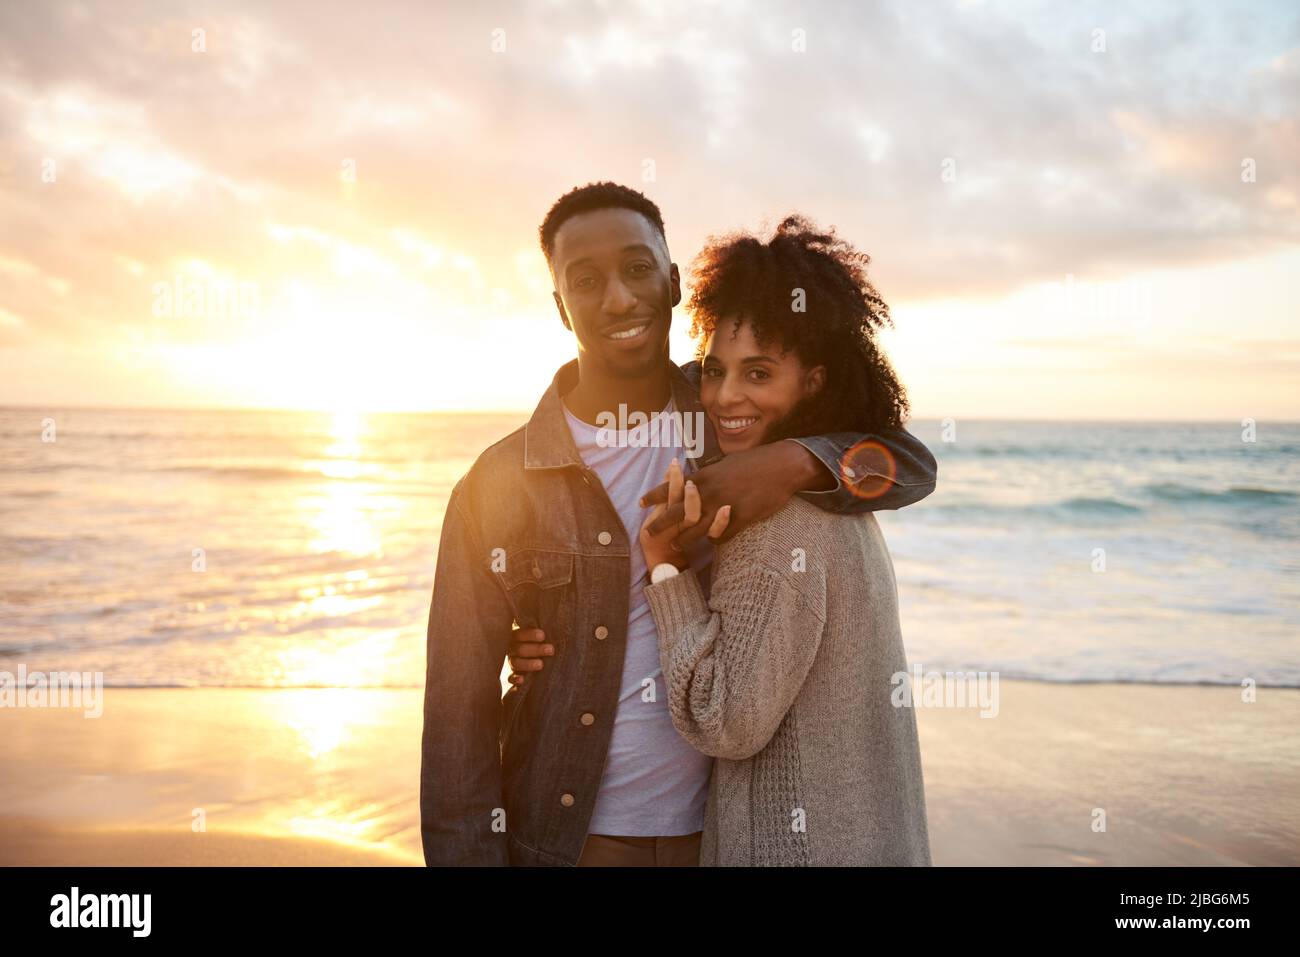 Loving young multiethnic couple smiling on a beach at sunset Stock Photo